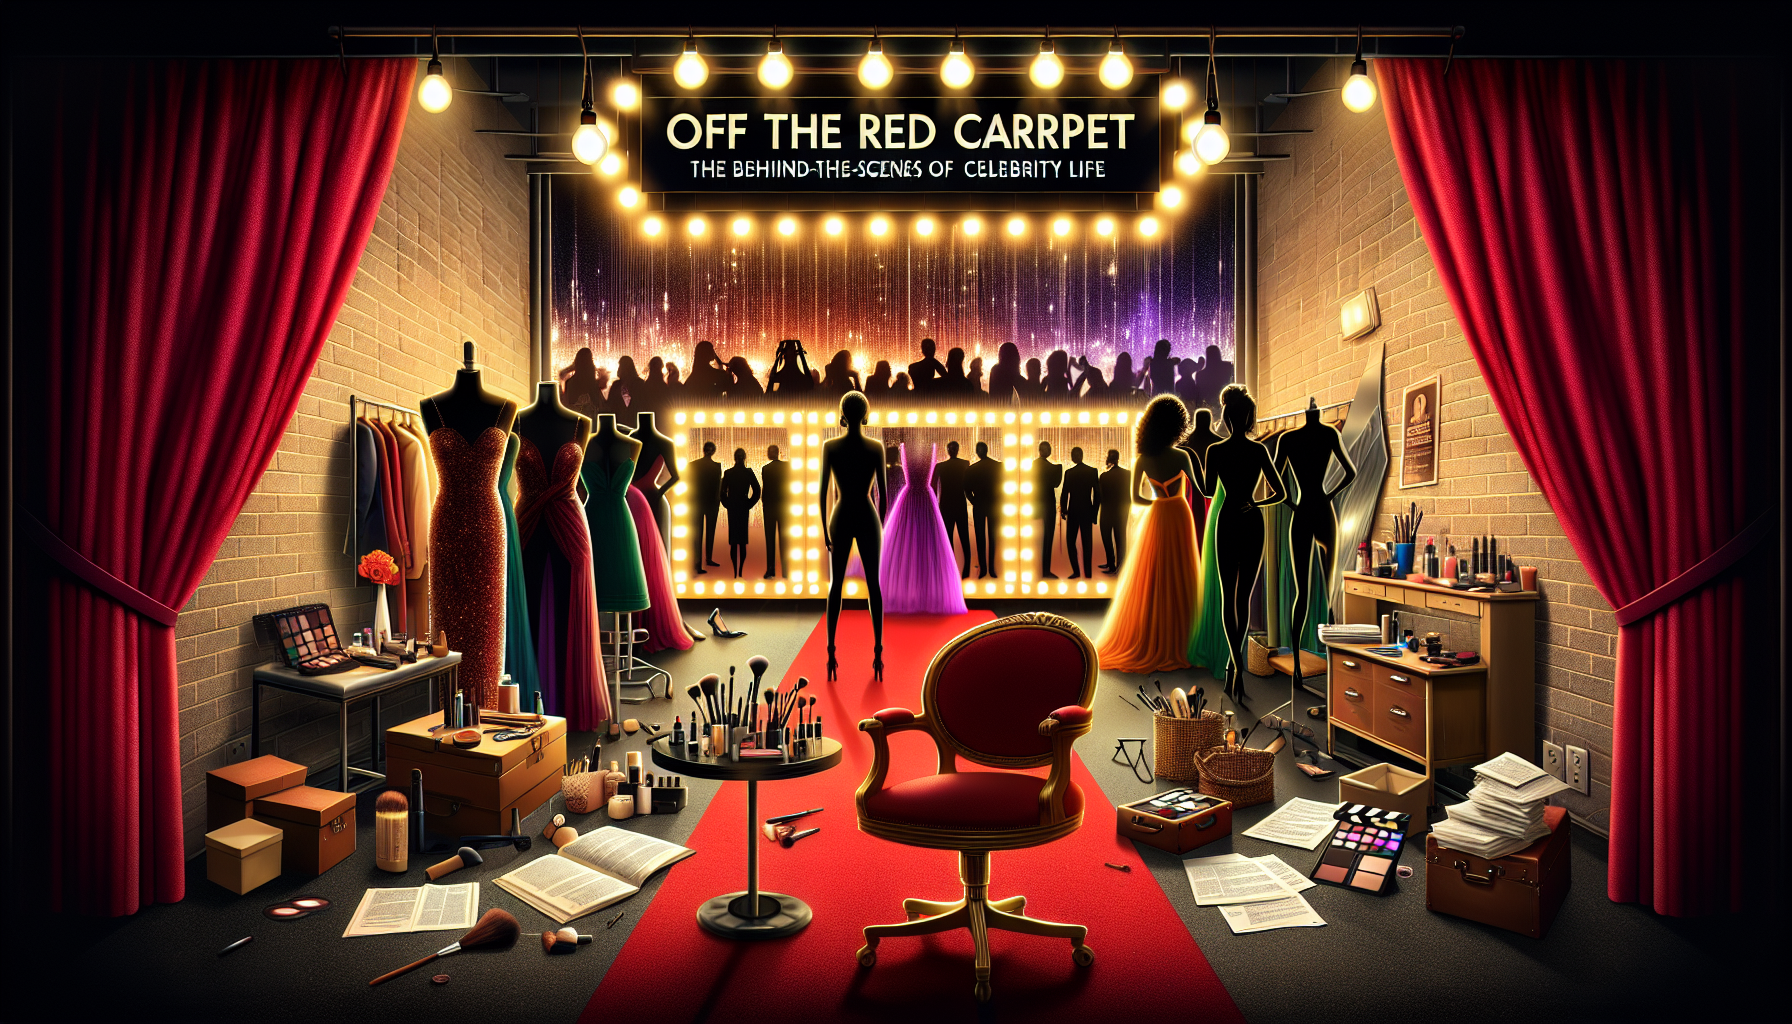 Off the Red Carpet: The Behind-the-Scenes of Celebrity Life